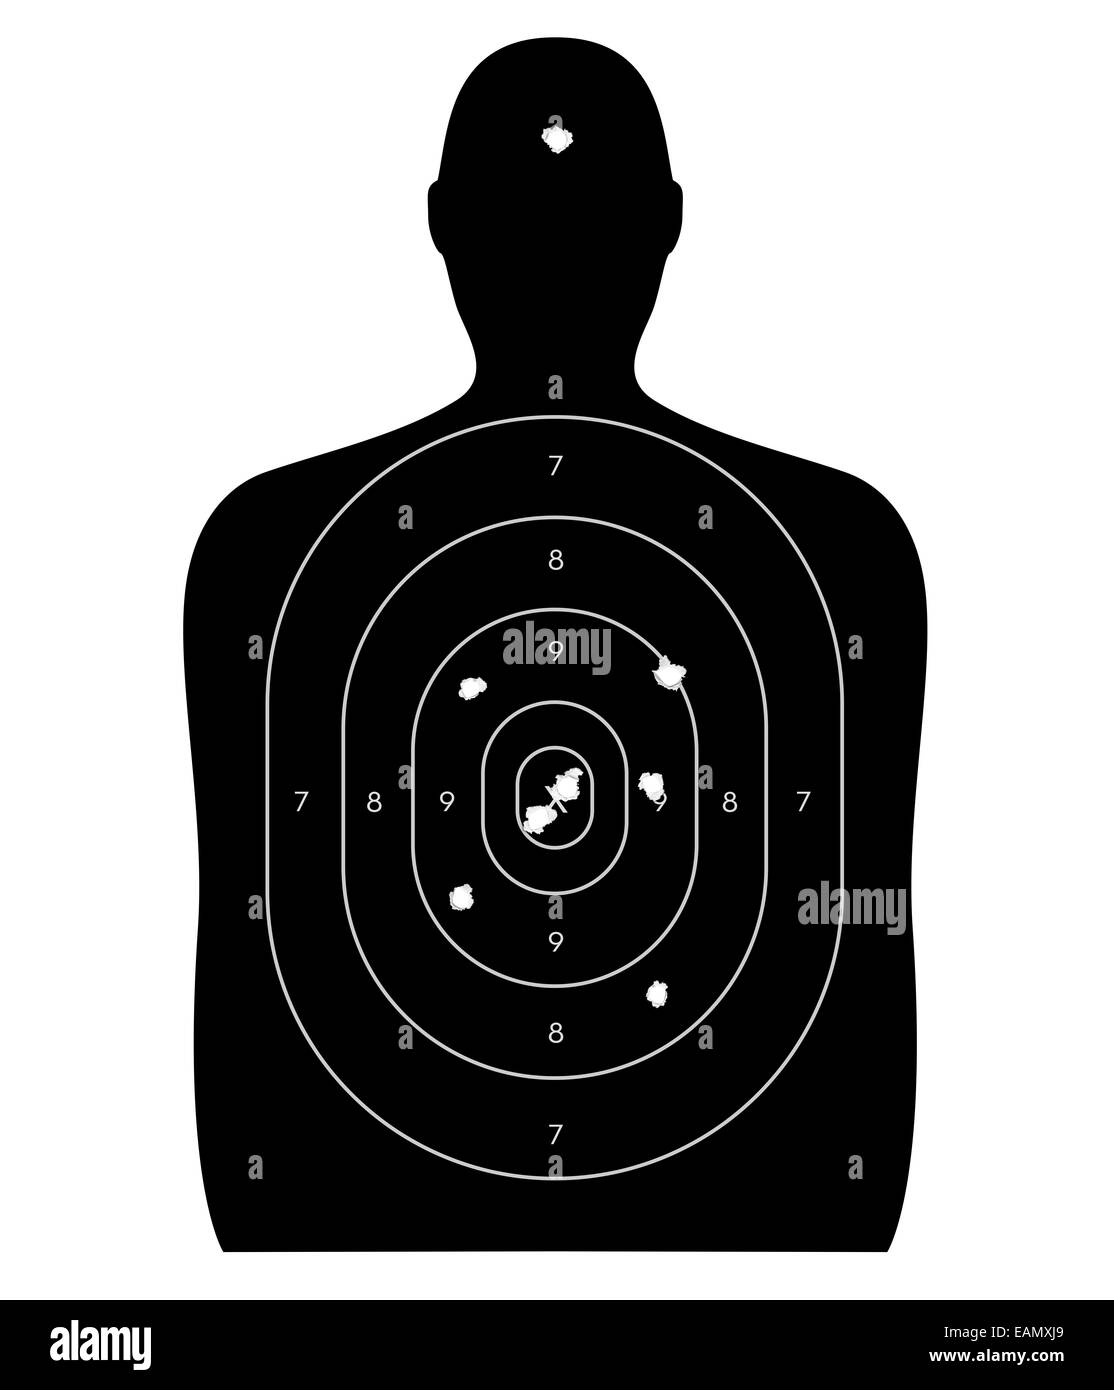 Gun firing range target shaped like a human, with bullet holes in the bull's-eye and a headshot. Isolated on a white background Stock Photo